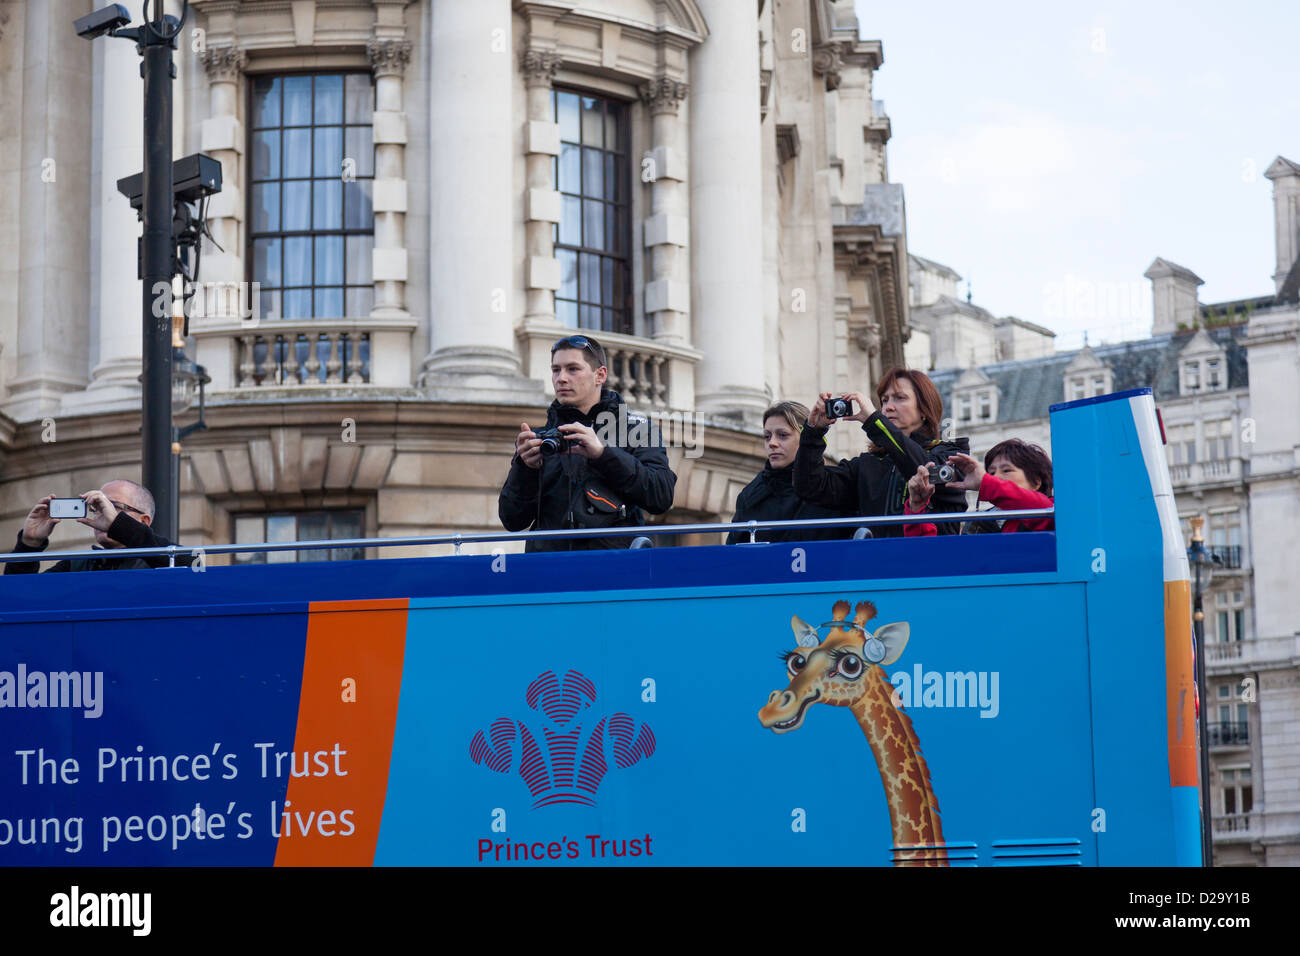 Tourists on the upper deck of an open double decker tourist bus take photographs as they travel through London. Stock Photo